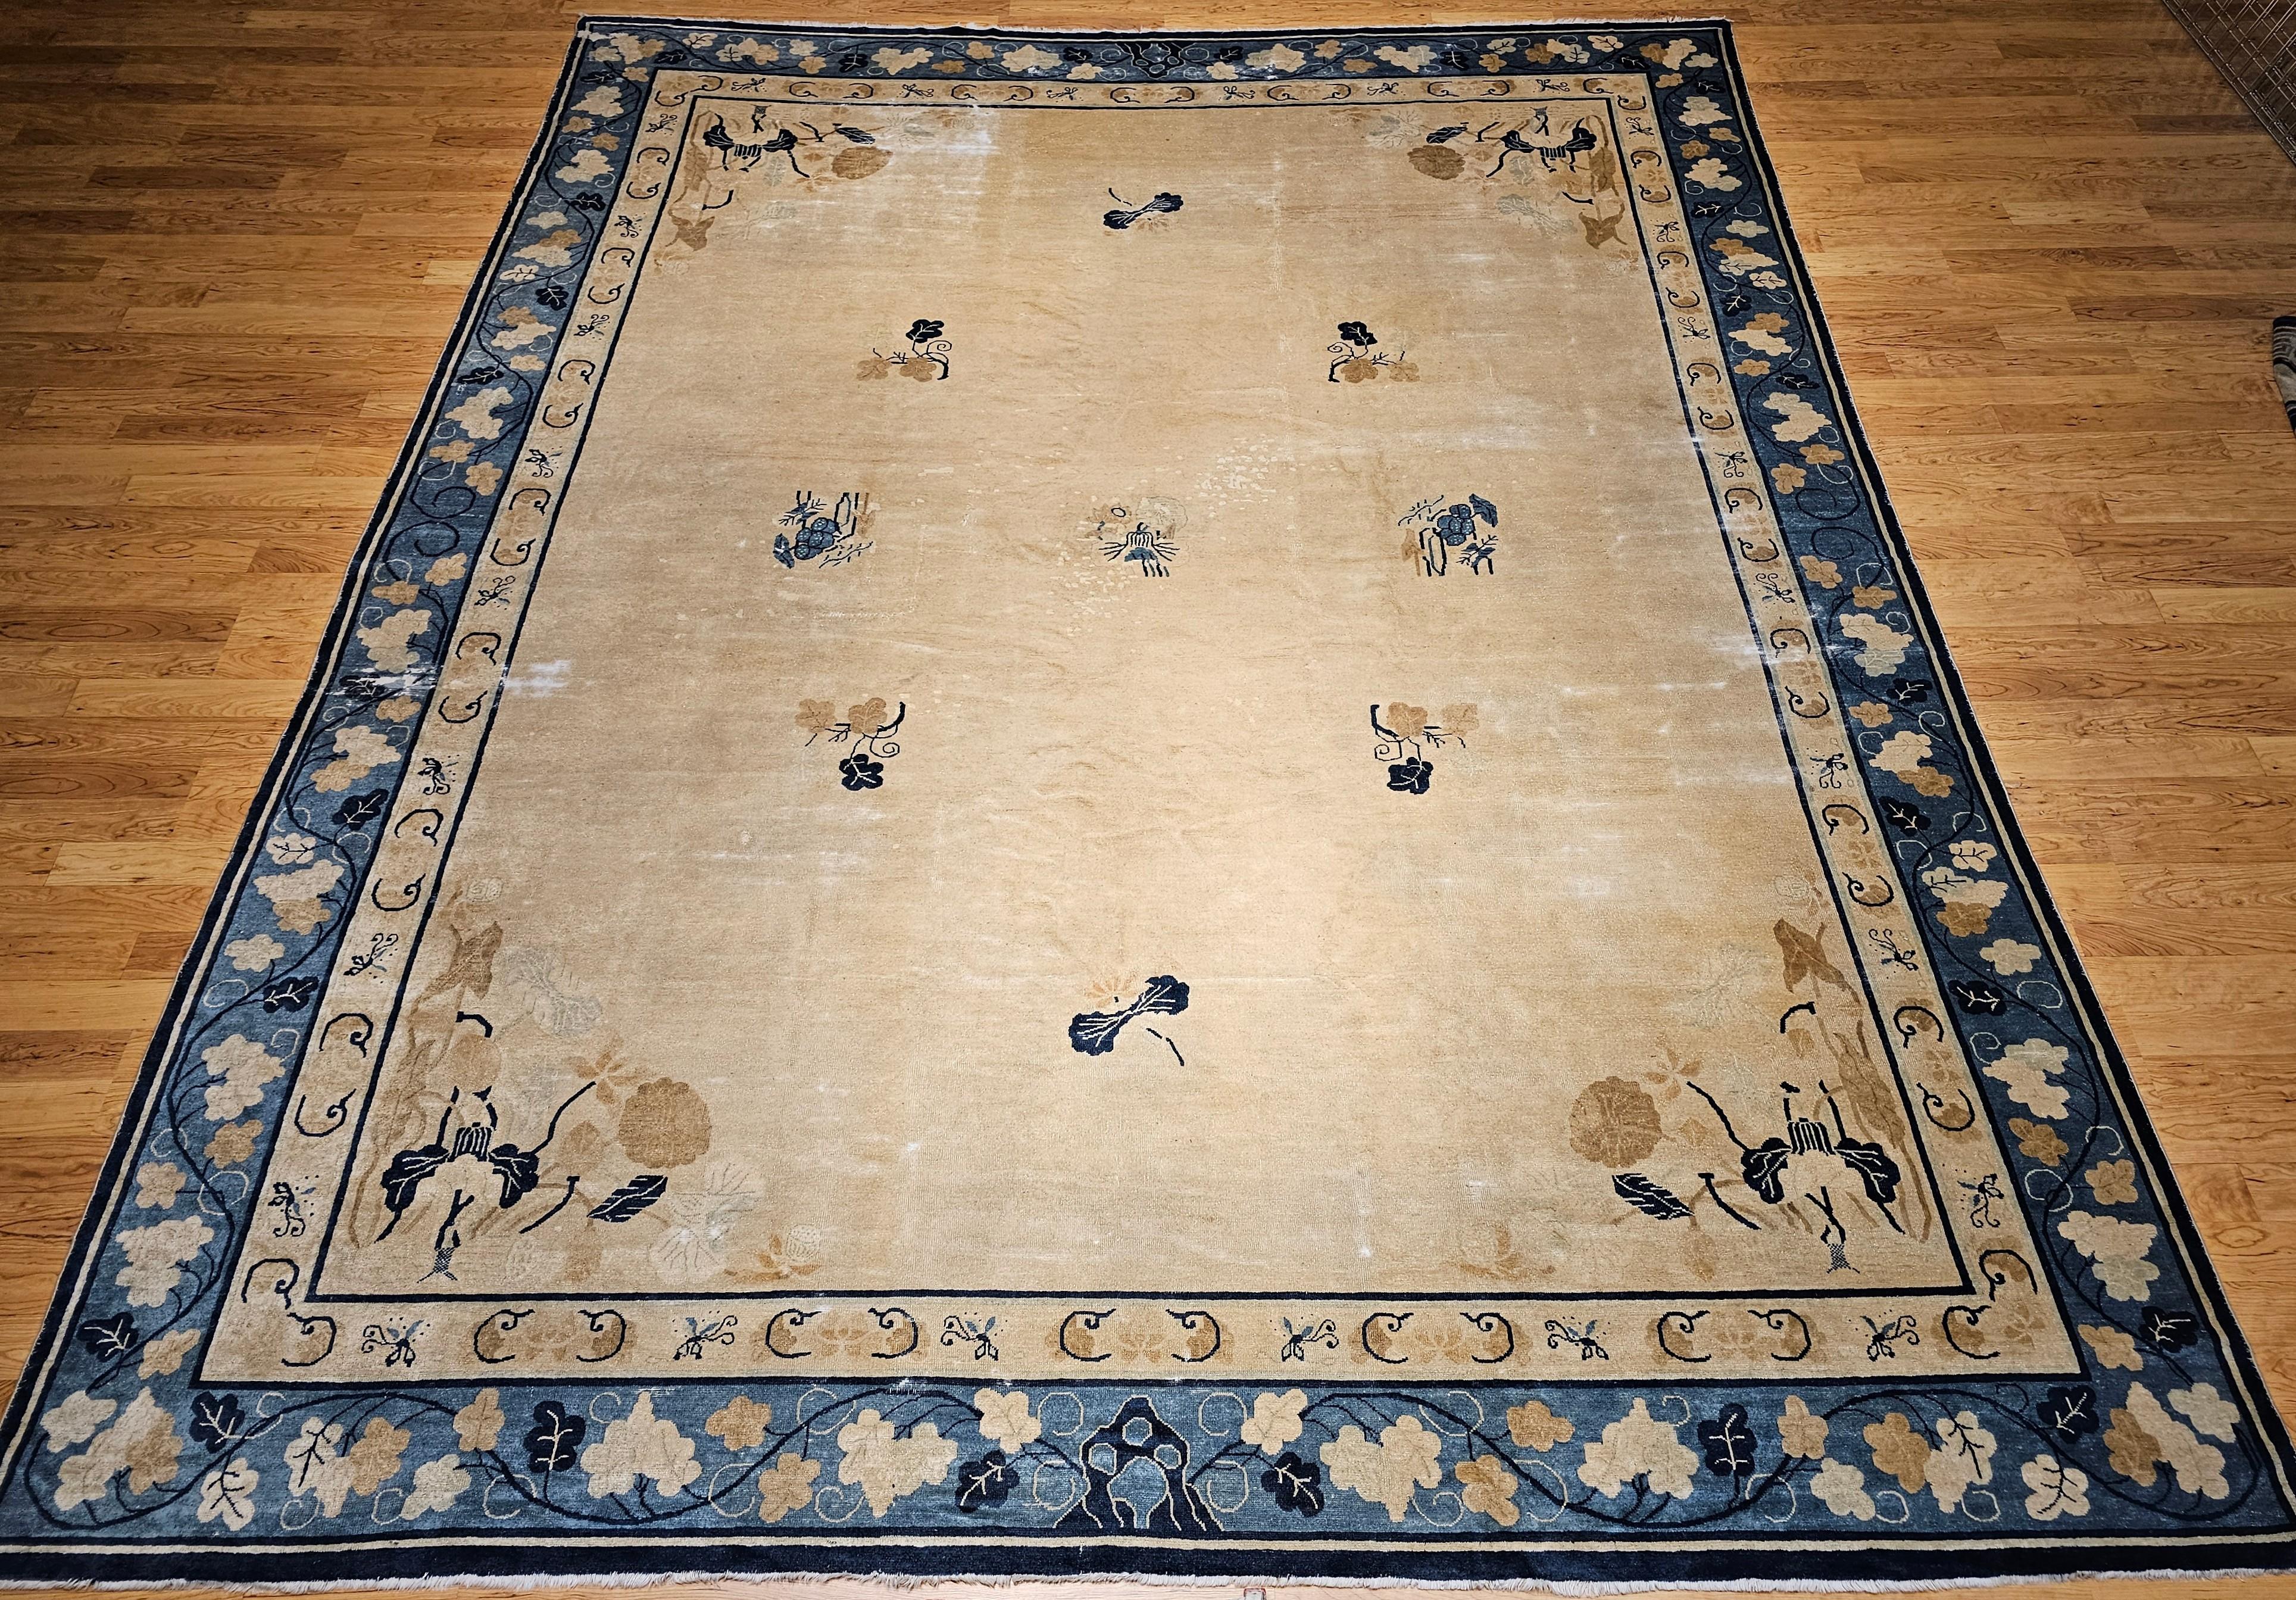  19th century Oversized Chinese Peking in a “near square” format with an allover open field pattern in wheat, Tiffany blue, sky-blue, and navy. The rug has a very unique and beautiful wheat field color with Tiffany blue and sky-blue Designs. The